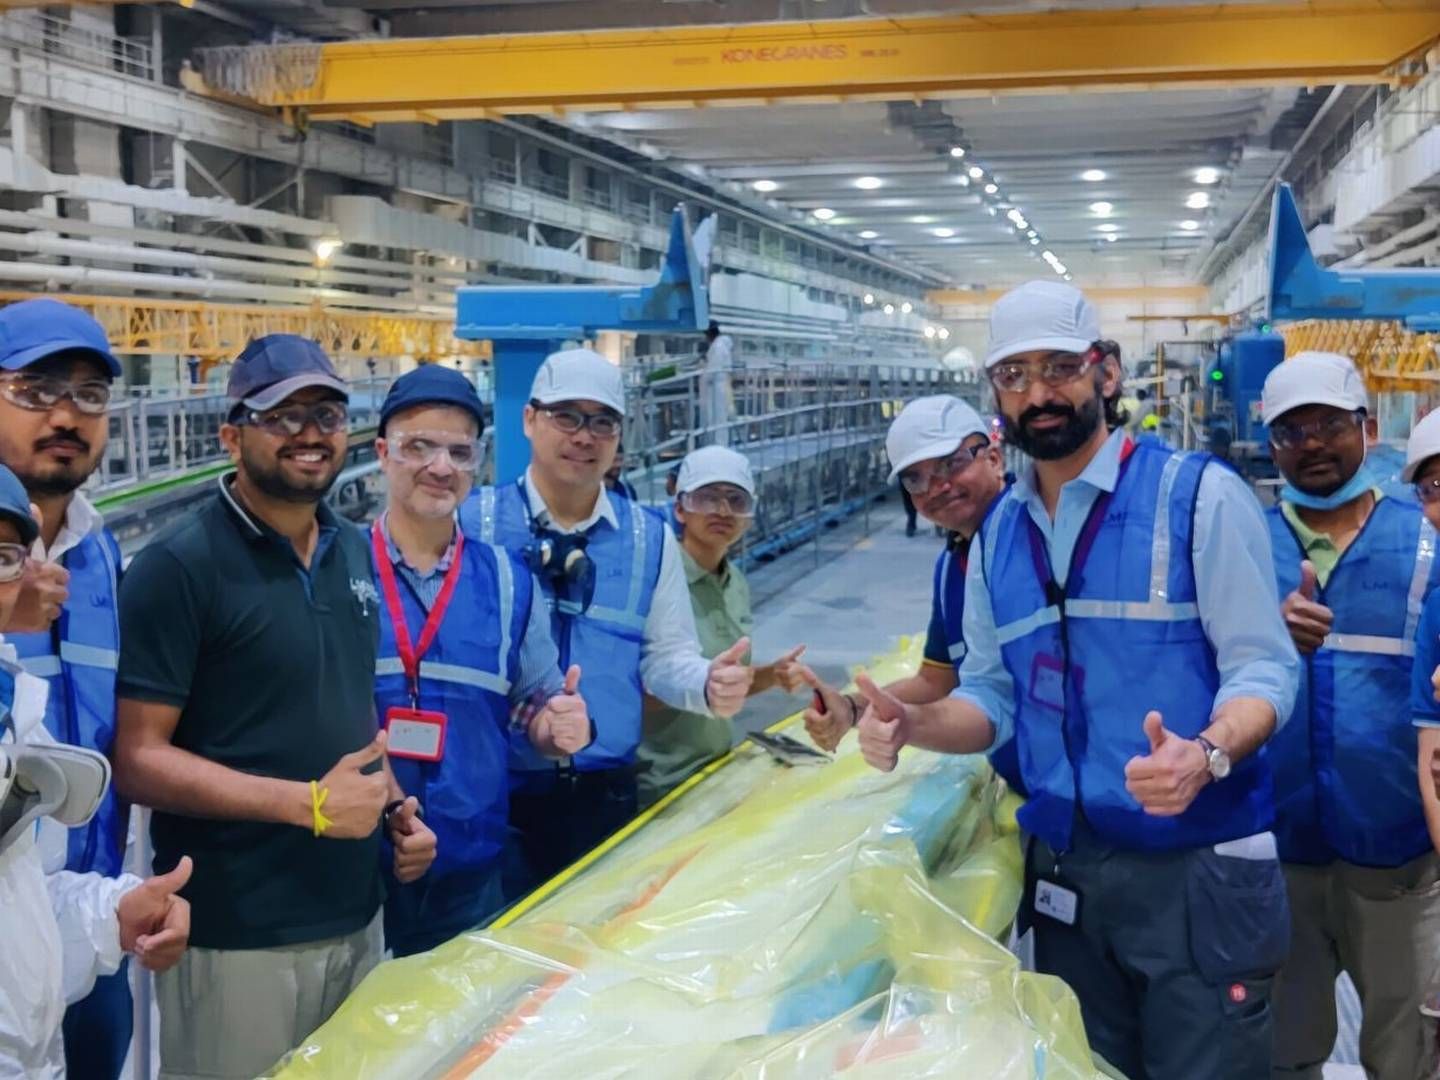 Hanif Mashal (fourth from the right), along with other members of LM's management team, toured a number of blade factories earlier this month. | Photo: Lm Wind Power